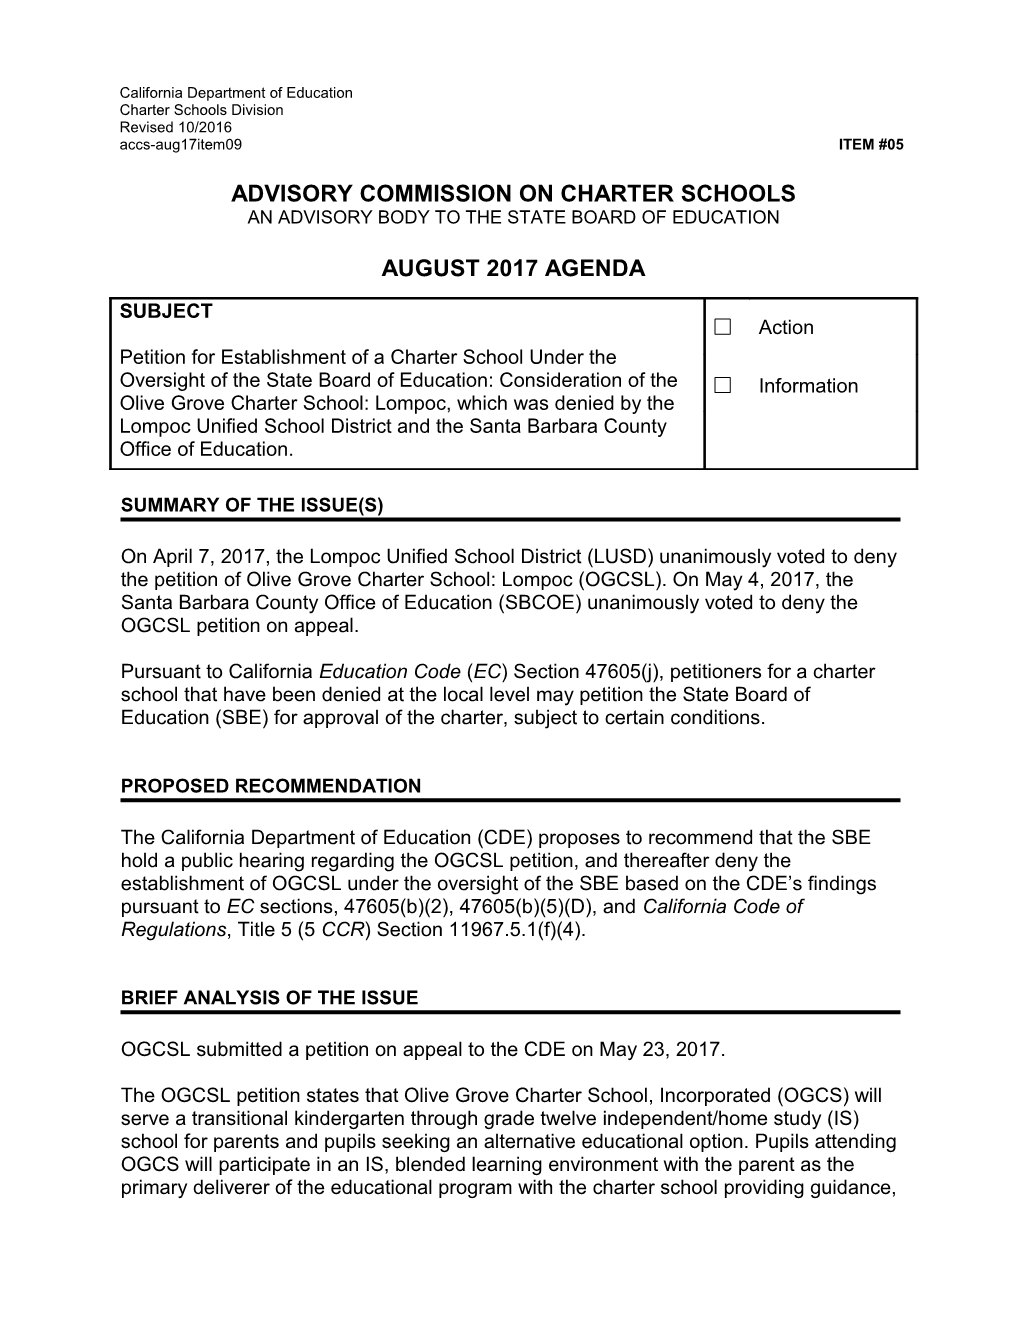 August 2017 ACCS Agenda Item 09 - Advisory Commission on Charter Schools (CA State Board